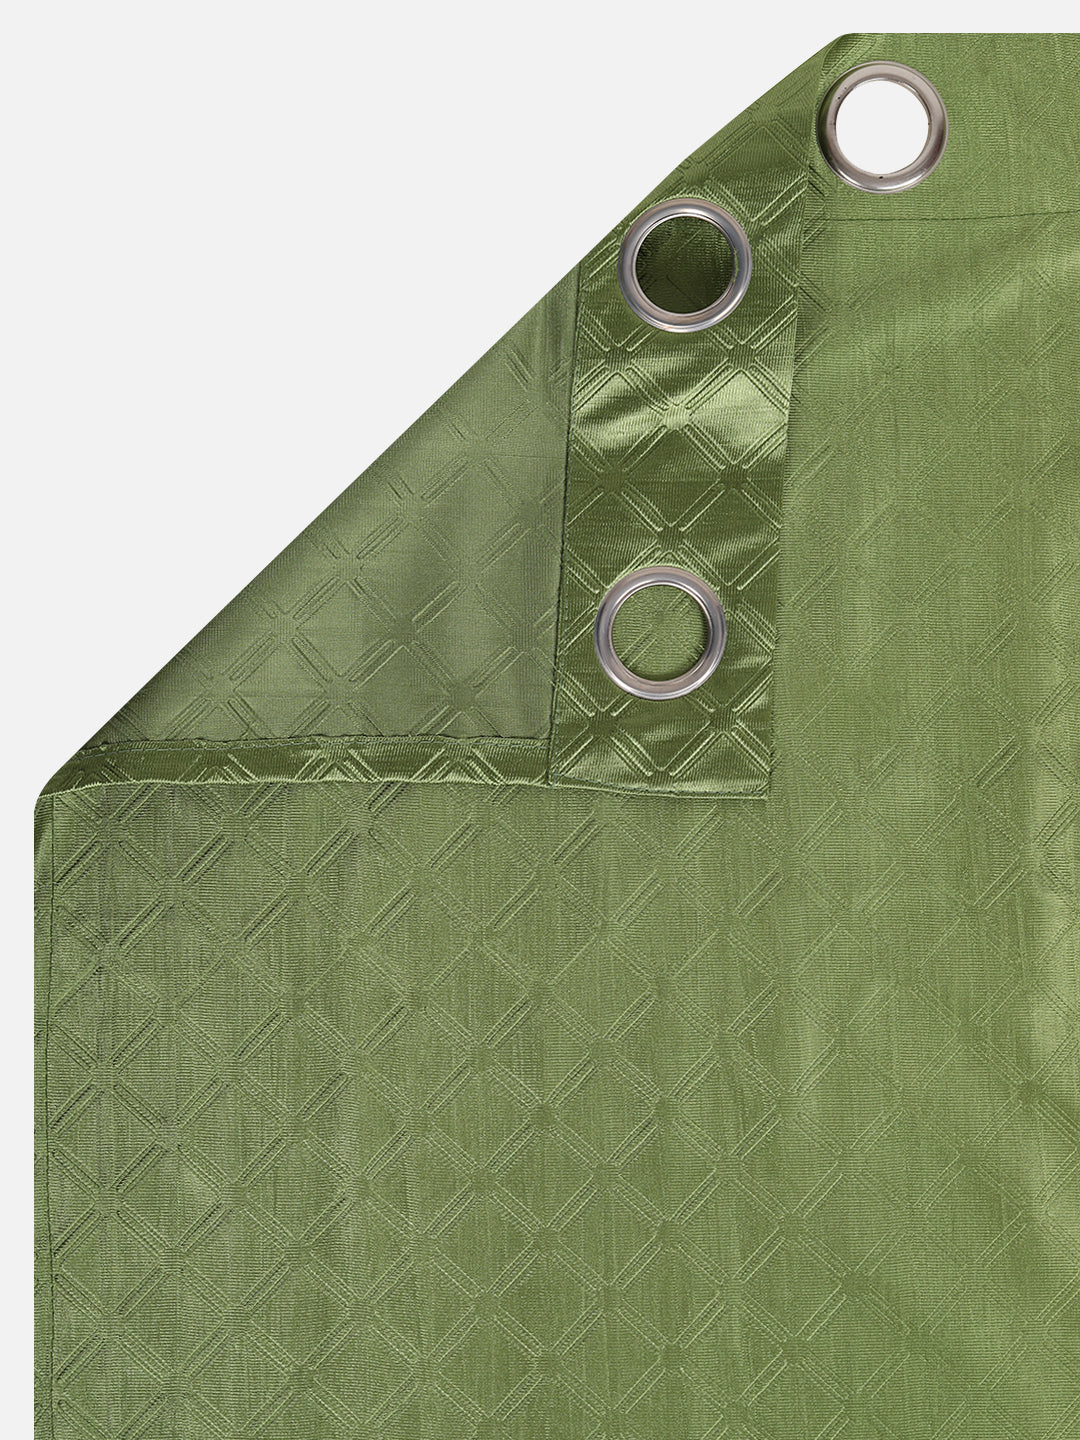 Romee Green Leafy Patterned Set of 2 Window Curtains